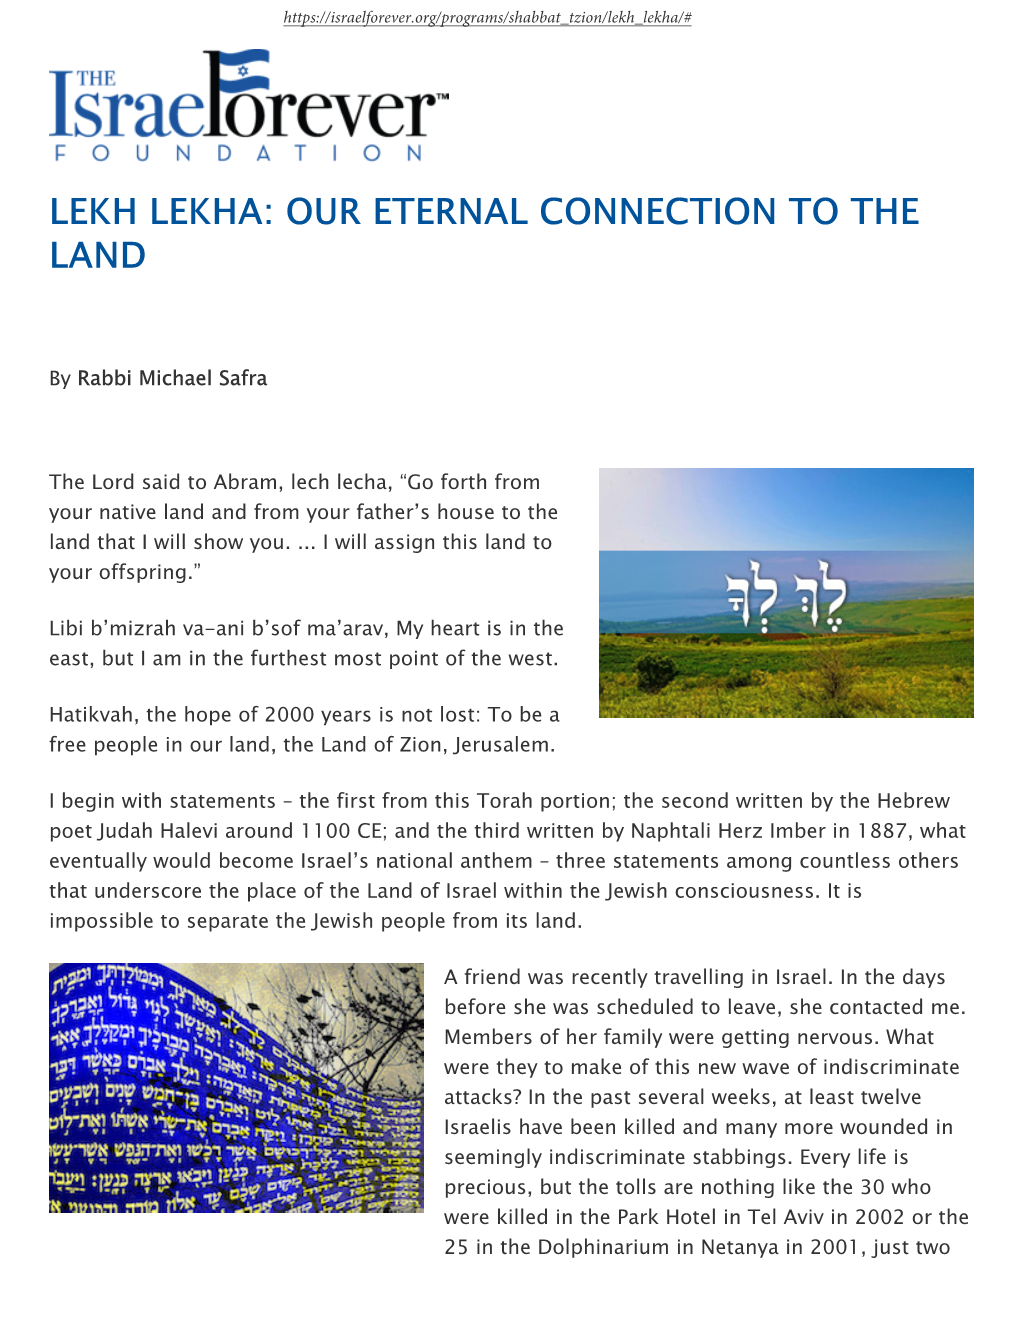 Lekh Lekha: Our Eternal Connection to the Land